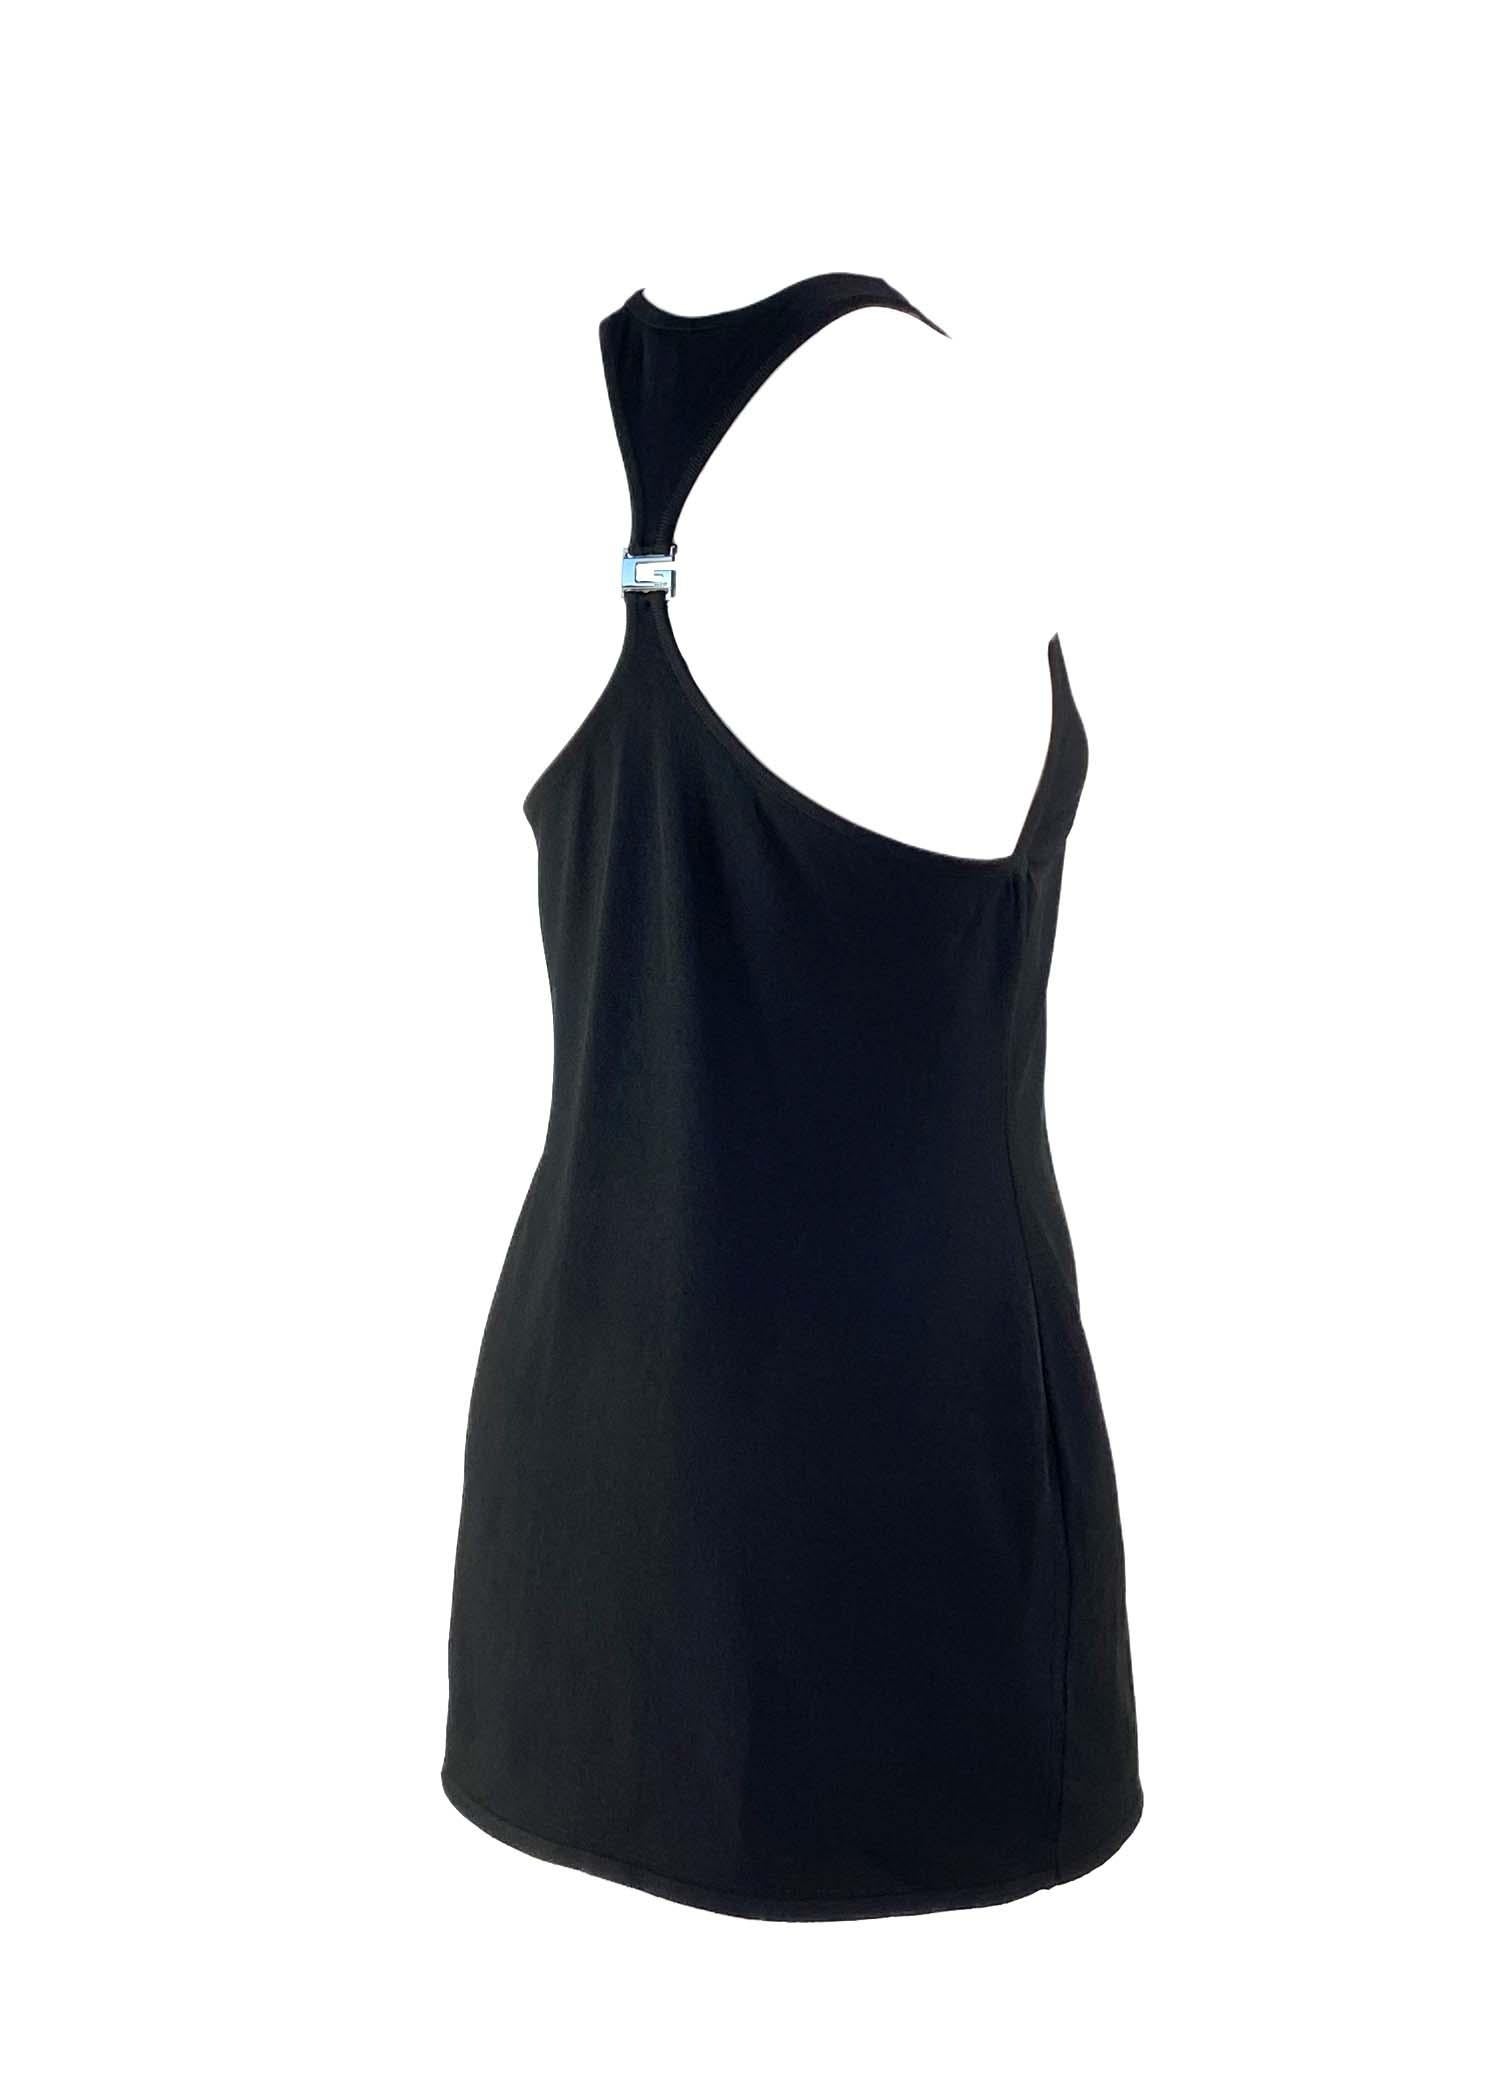 TheRealList presents: a beautiful knit racerback Gucci mini dress, designed by Tom Ford. From the Spring/Summer 1998 collection, this dress features a high neckline, racerback, and a square 'G' logo adornment. This simple and sexy black dress is the